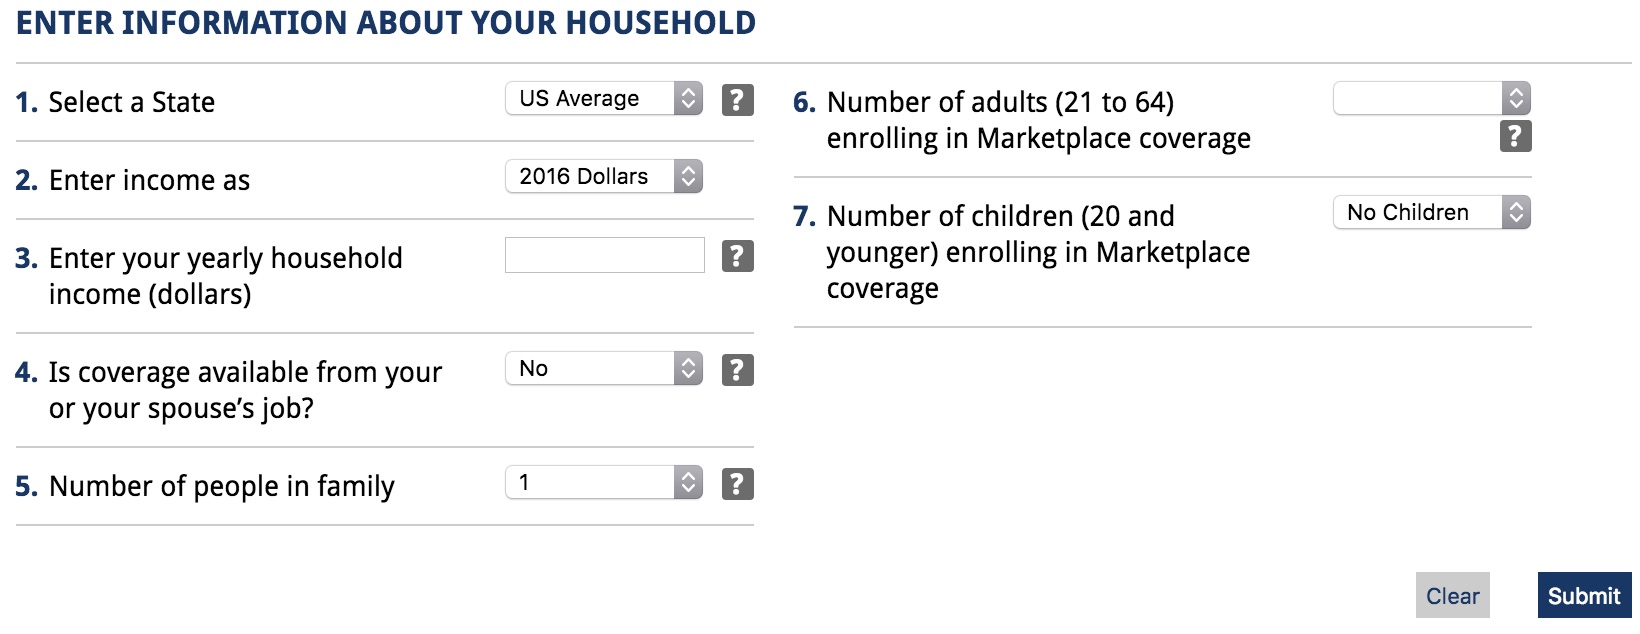 An image of the healthcare marketplace built for KFF, with multiple dropdown questions to enter information about the user's household